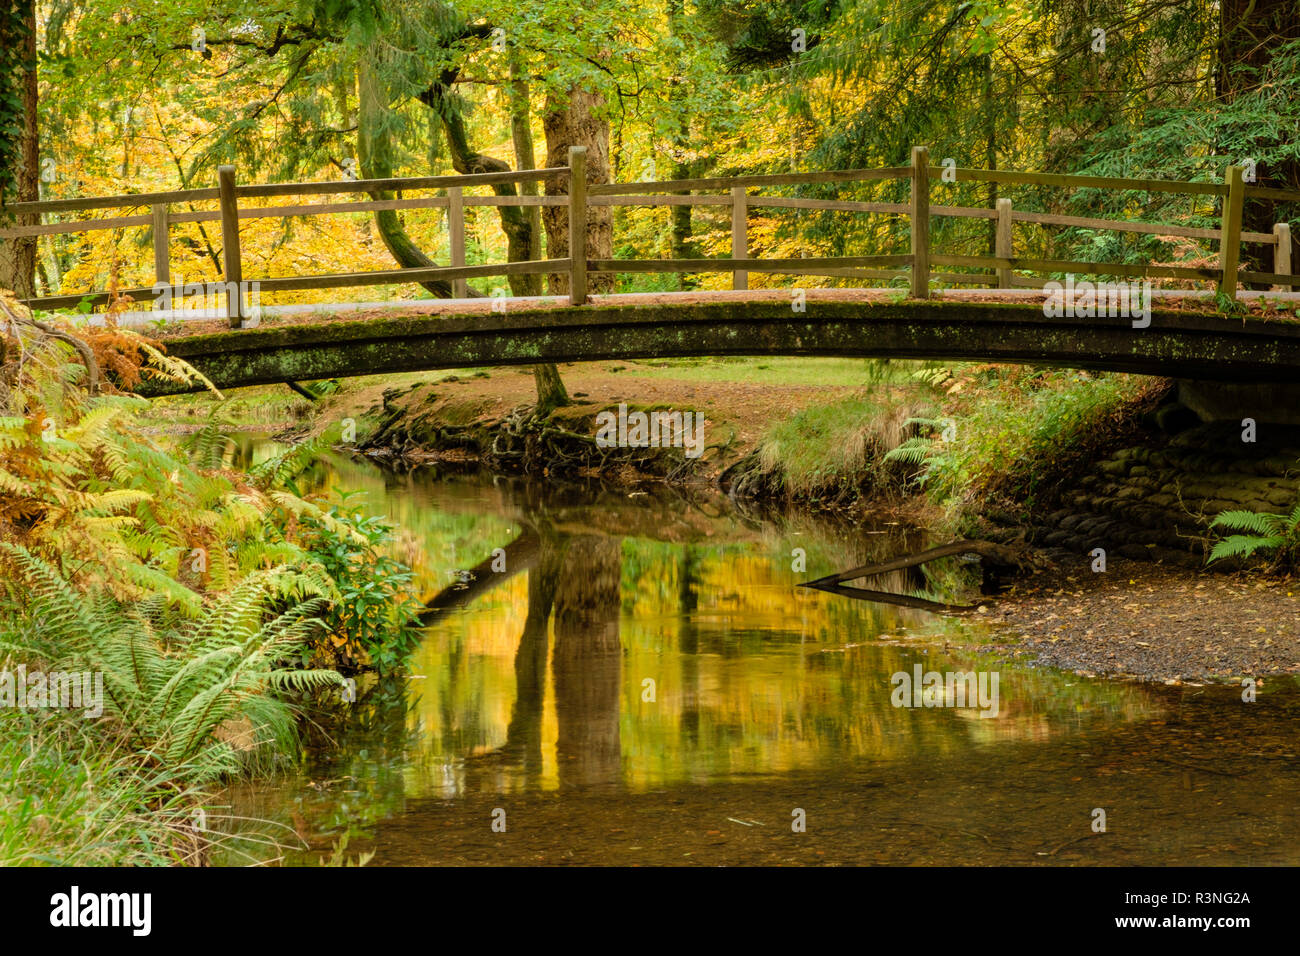 Road Bridge over the Black Water River in Autumn, New Forest National Park, Hampshire, England, UK, Stock Photo